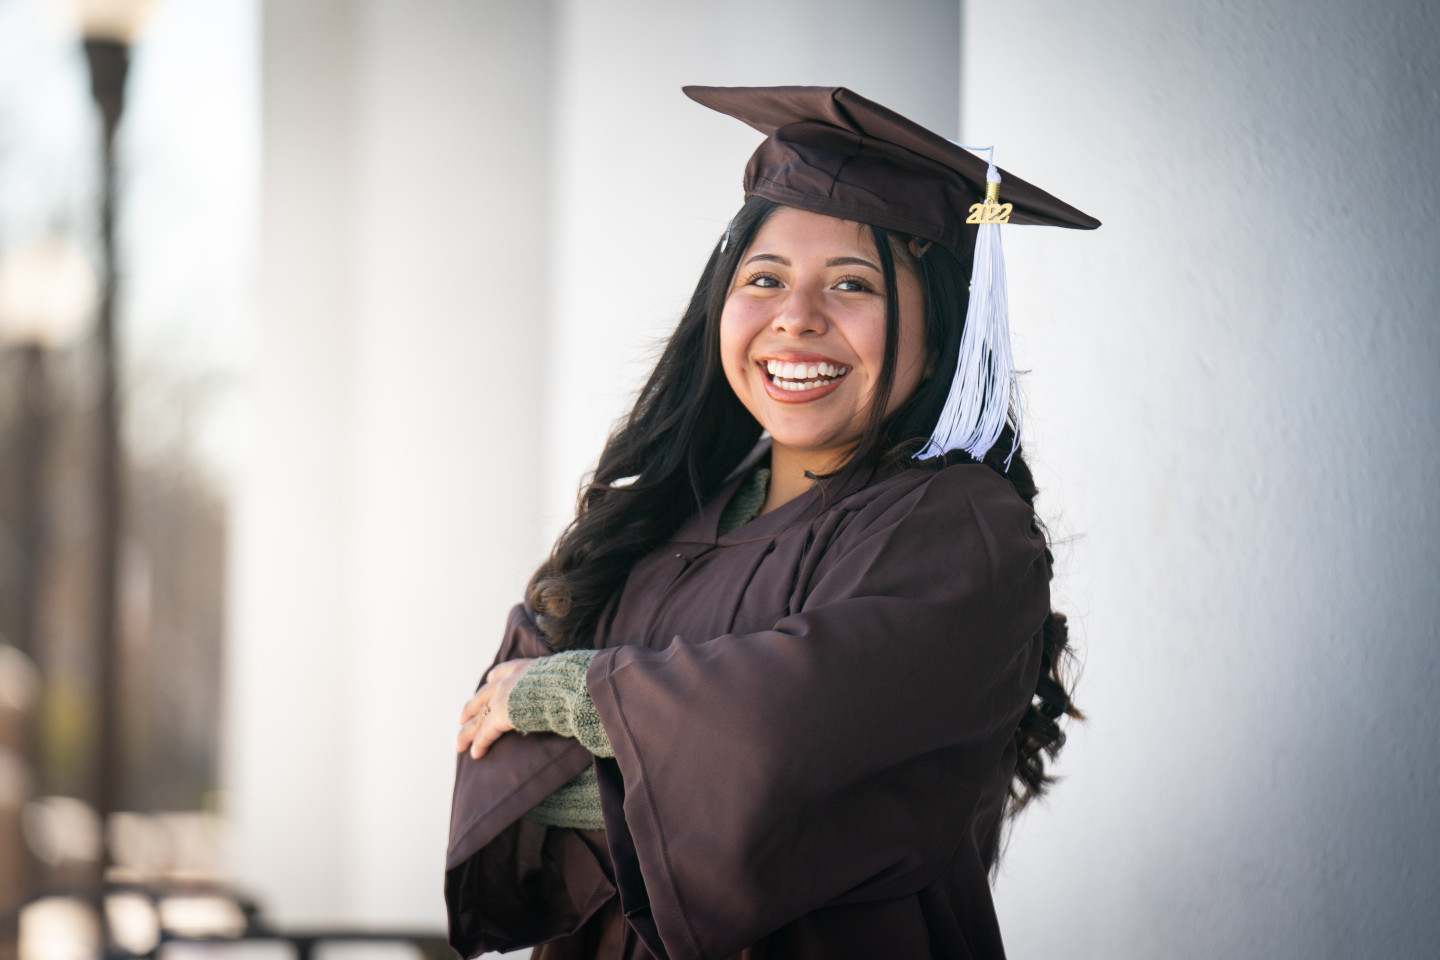 Elizbia Capula poses for a photo in her graduation cap and gown.